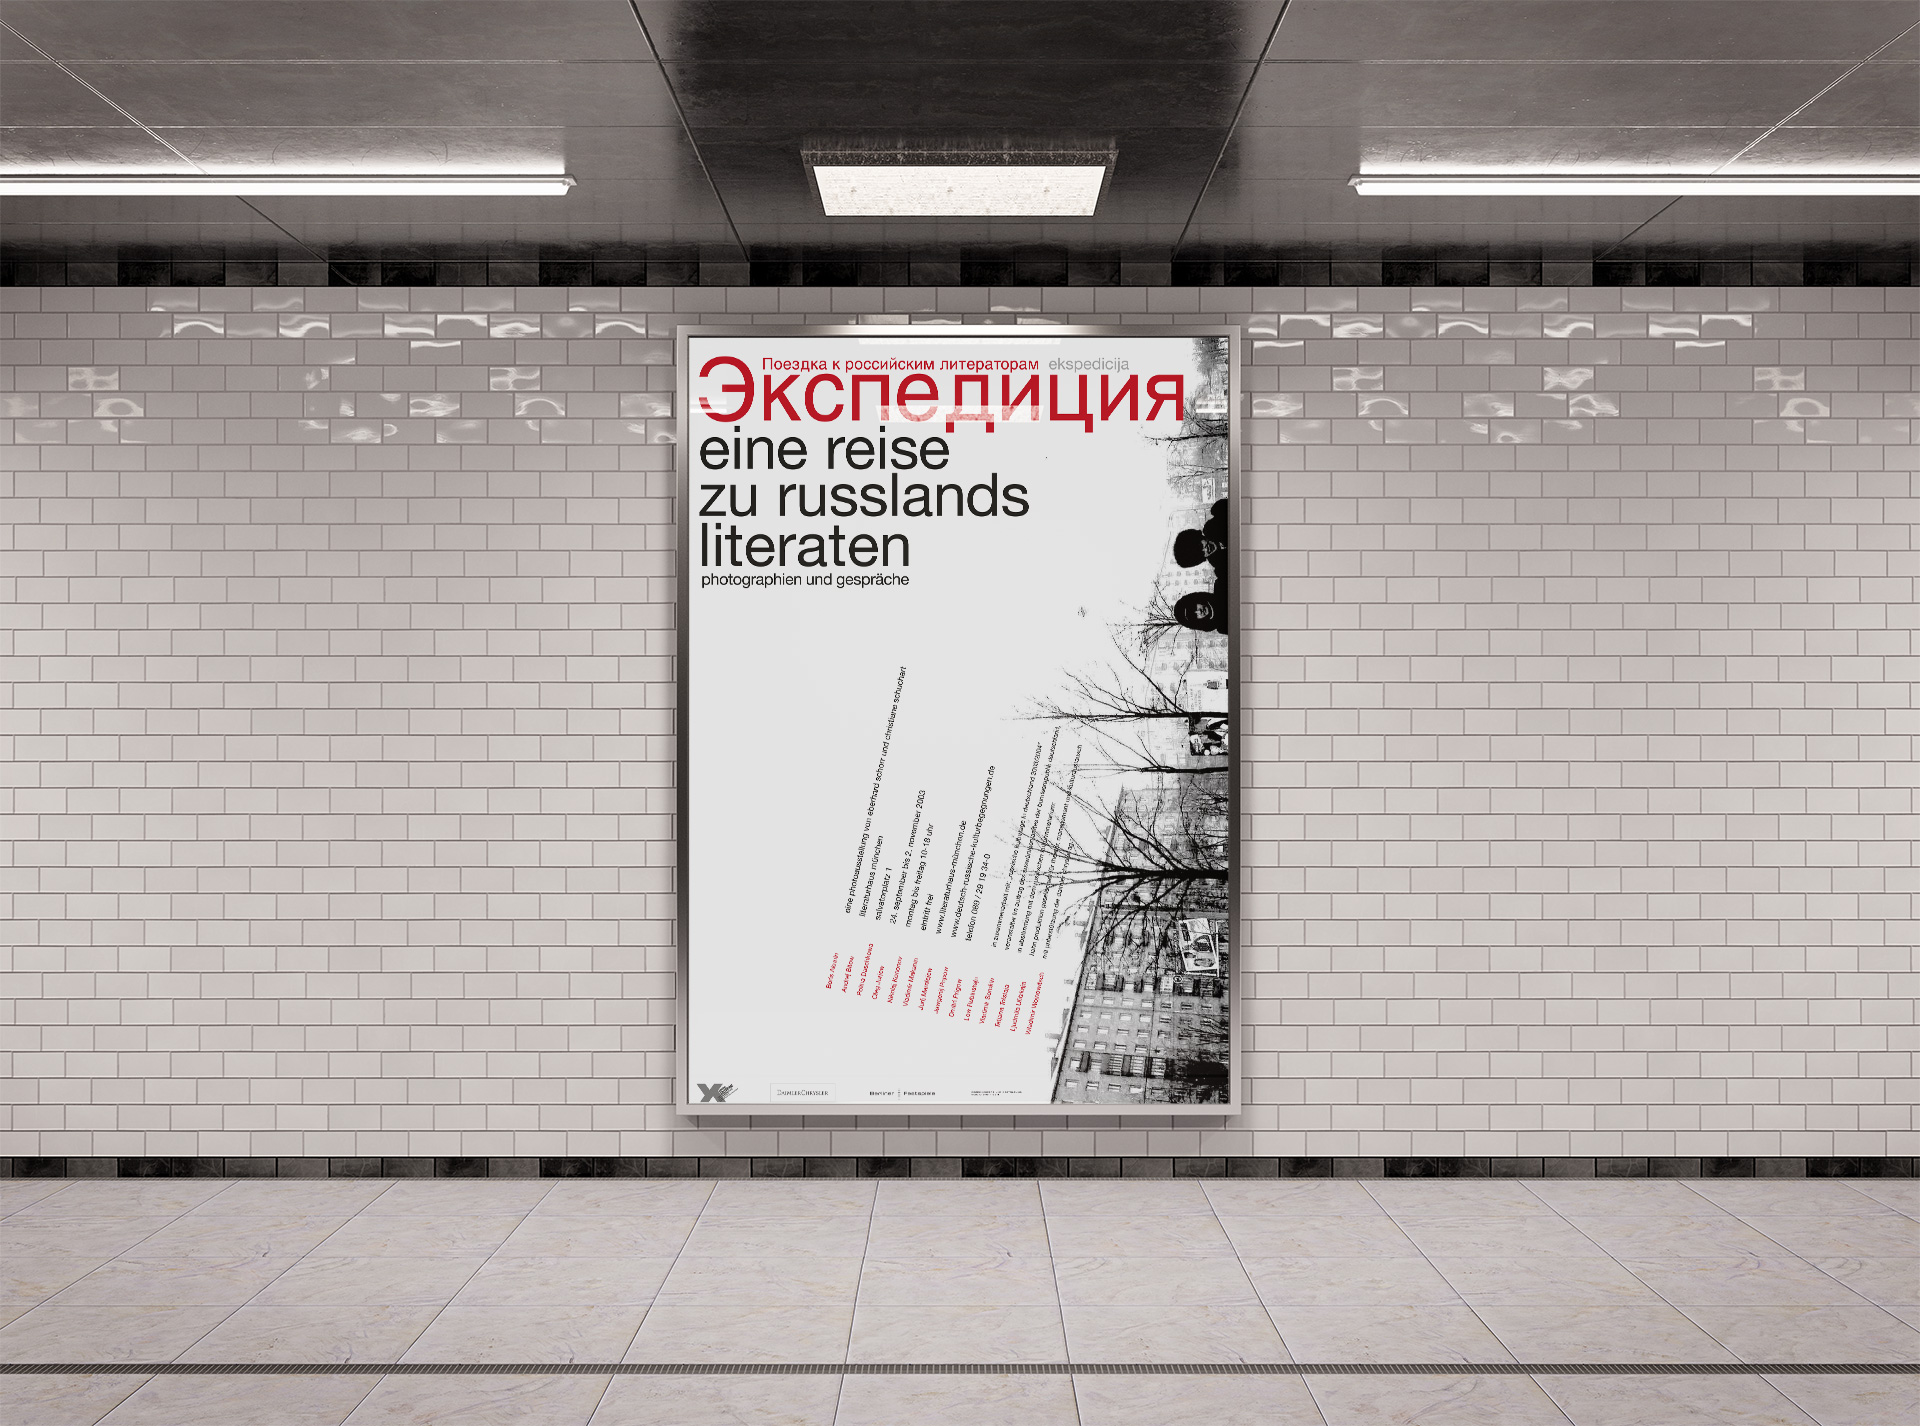 advertising billboard for the ekspedicija exhibition in a subway station, white tiles in the background